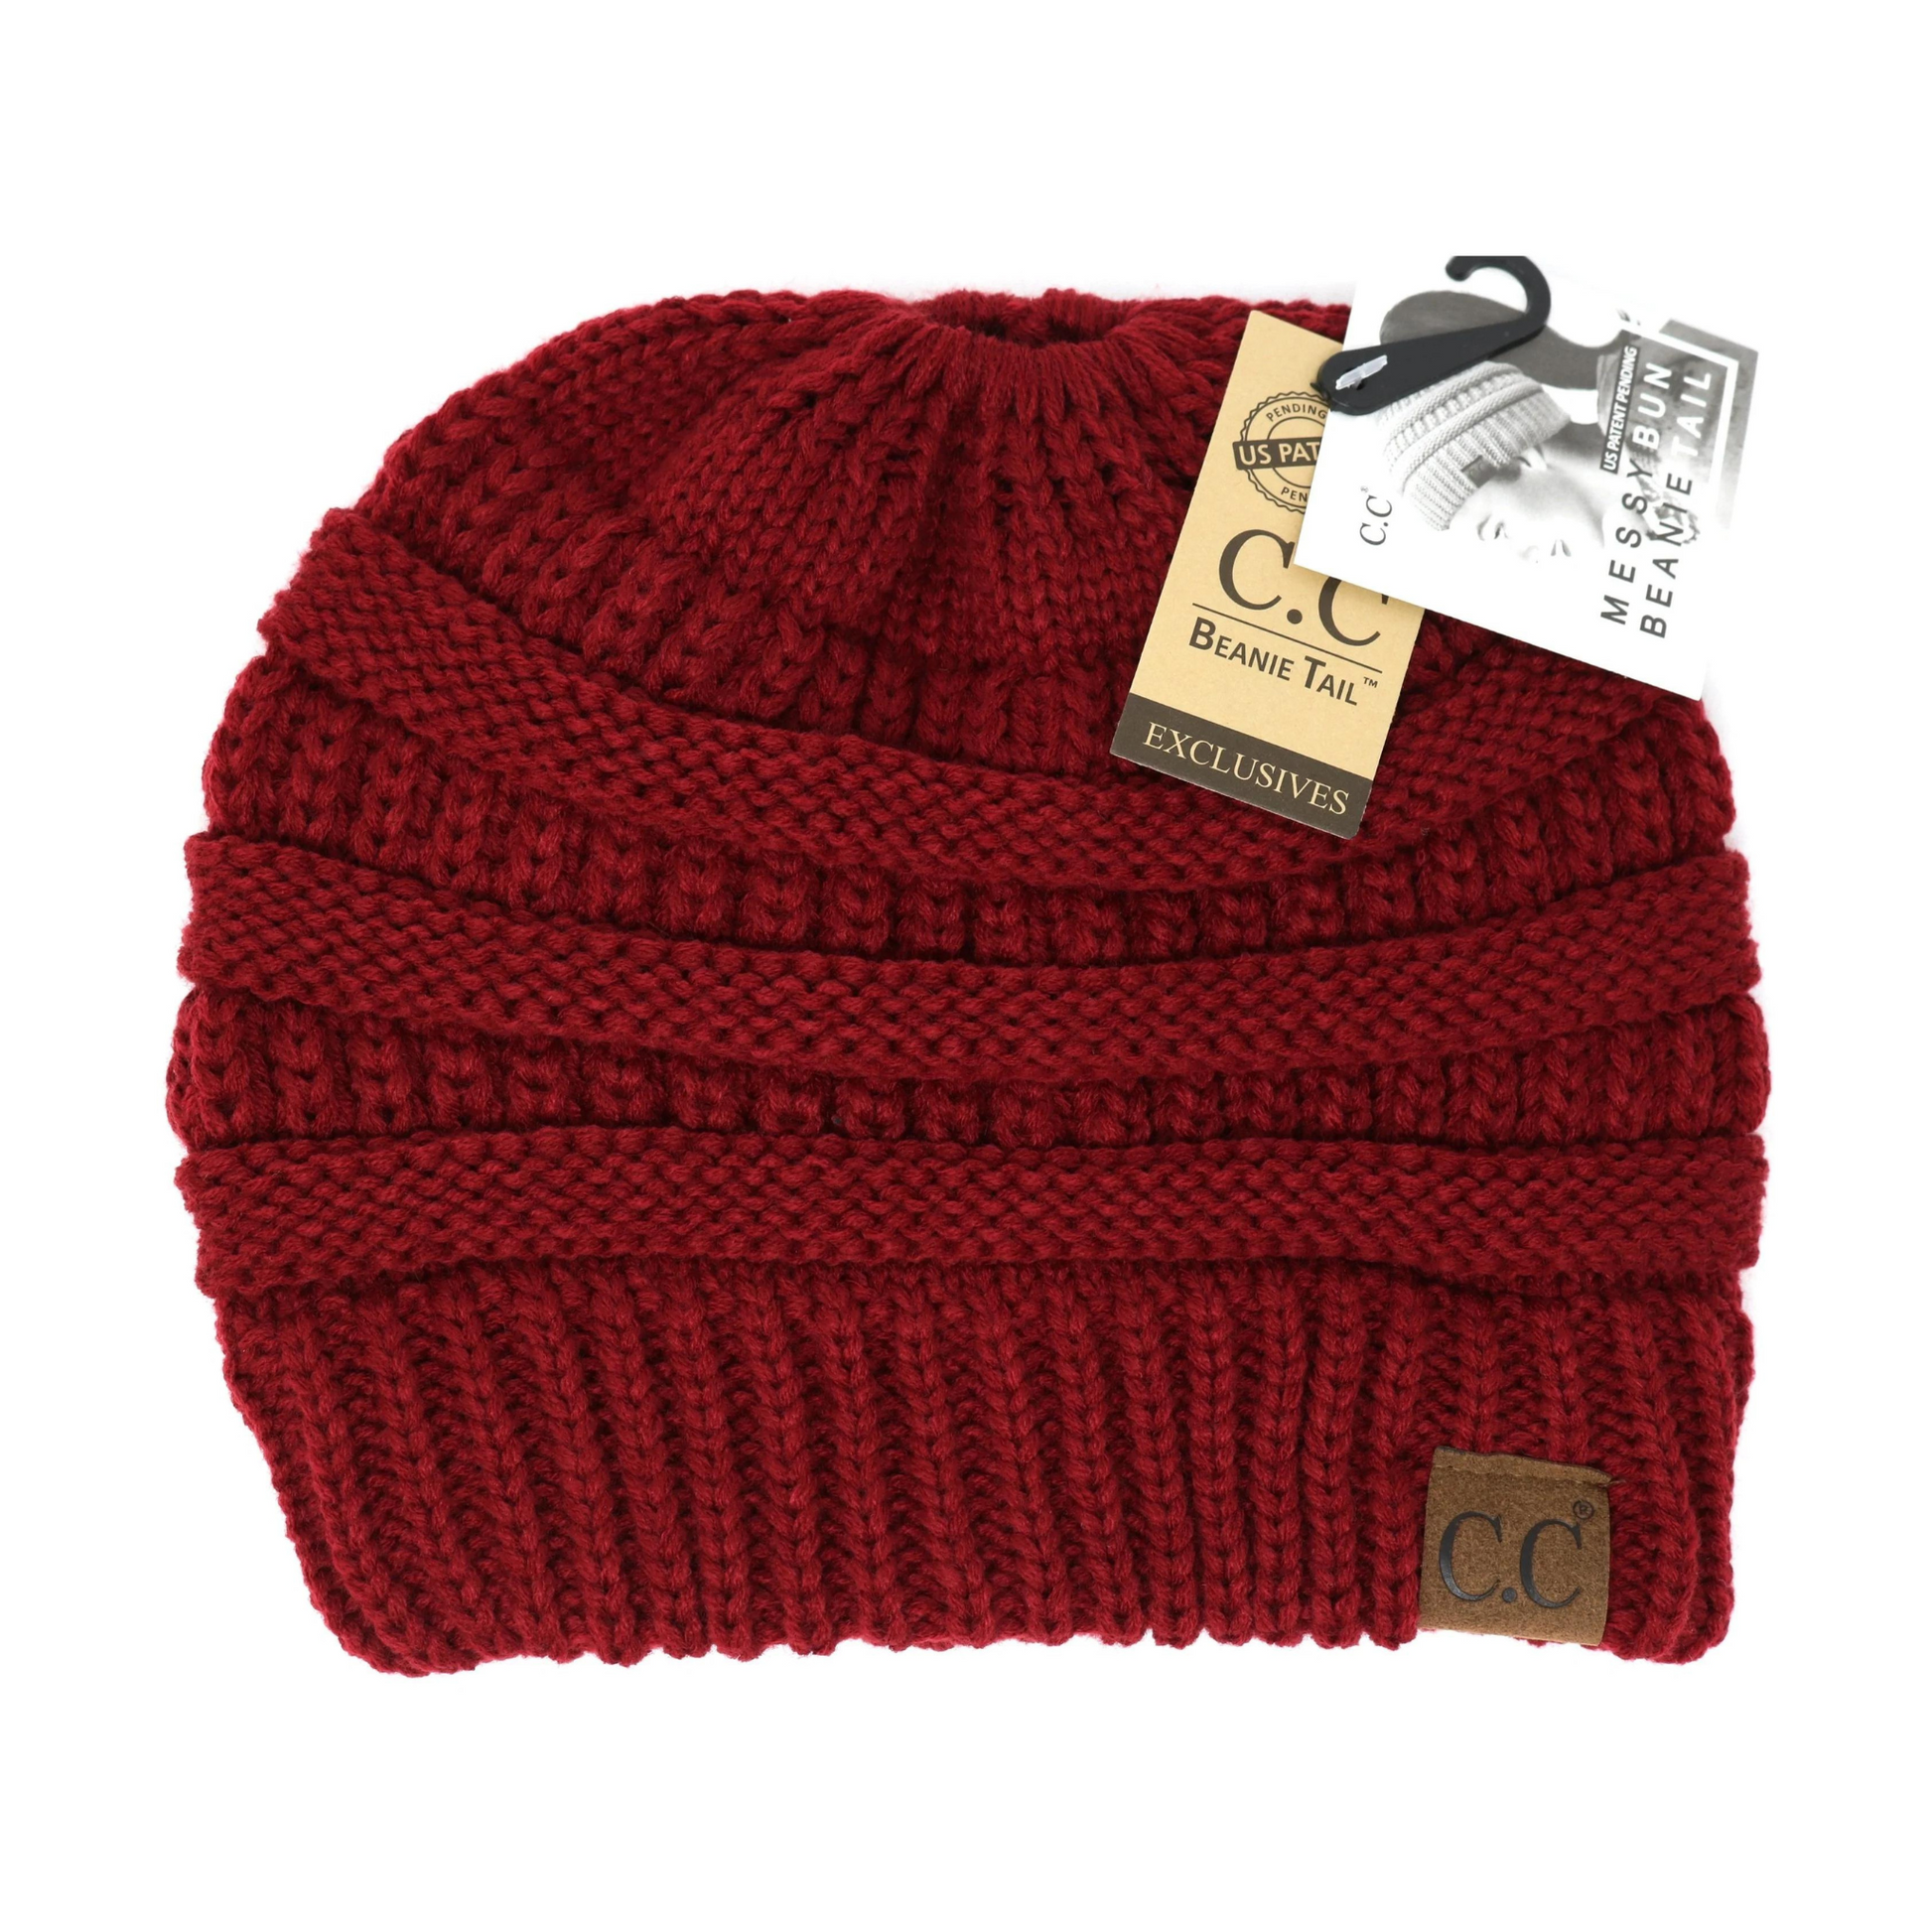 A front view of a burgundy, ribbed knitted beanie with an opening in the top.